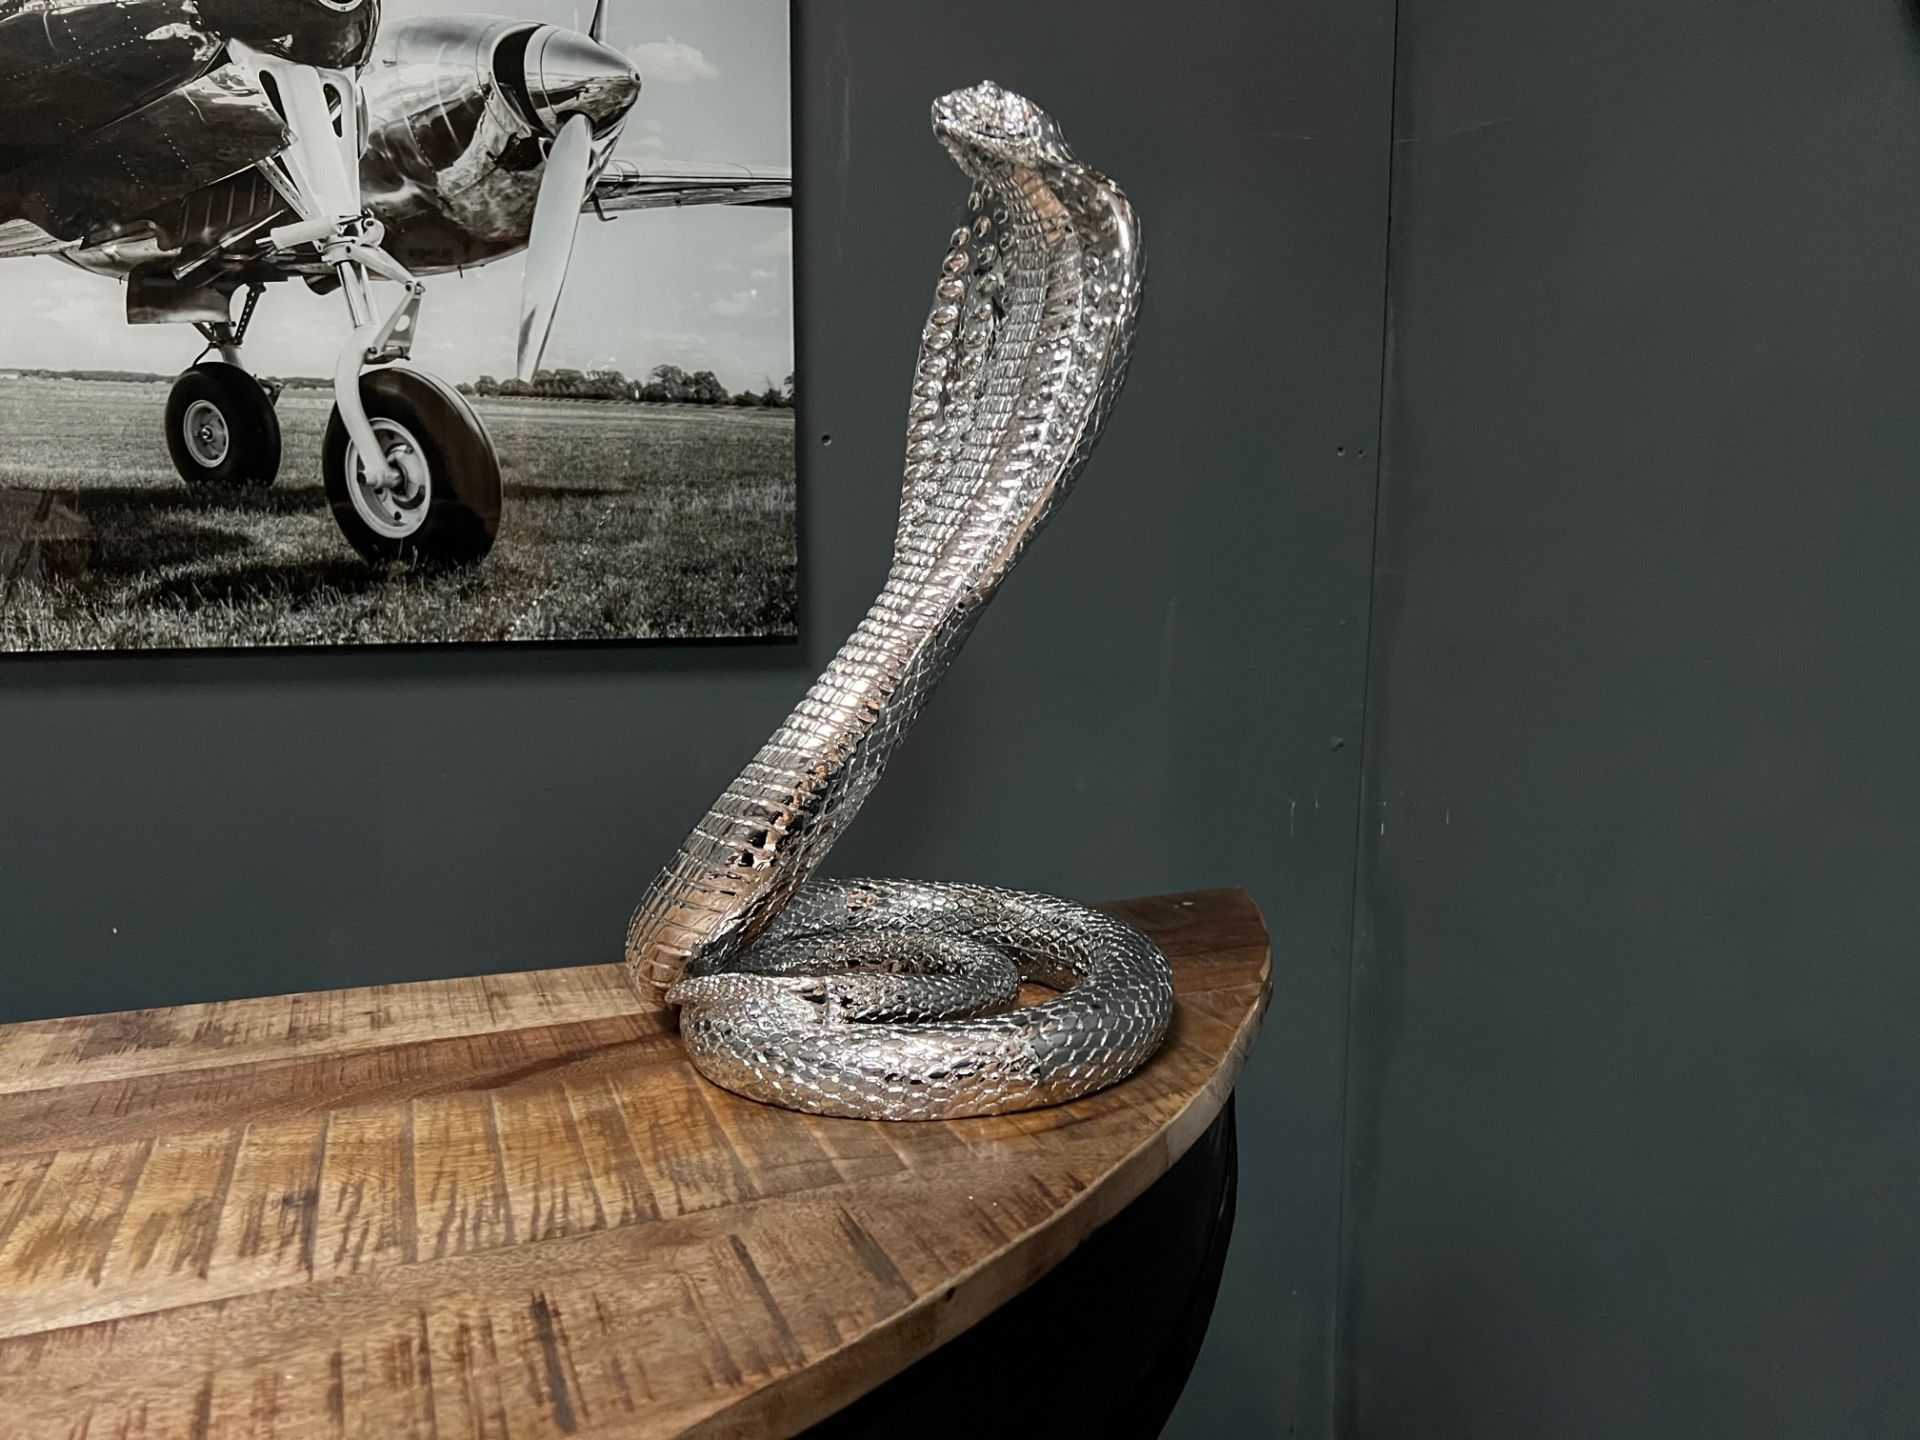 New Boxed Large Silver Resin Snake Statue - Image 5 of 6